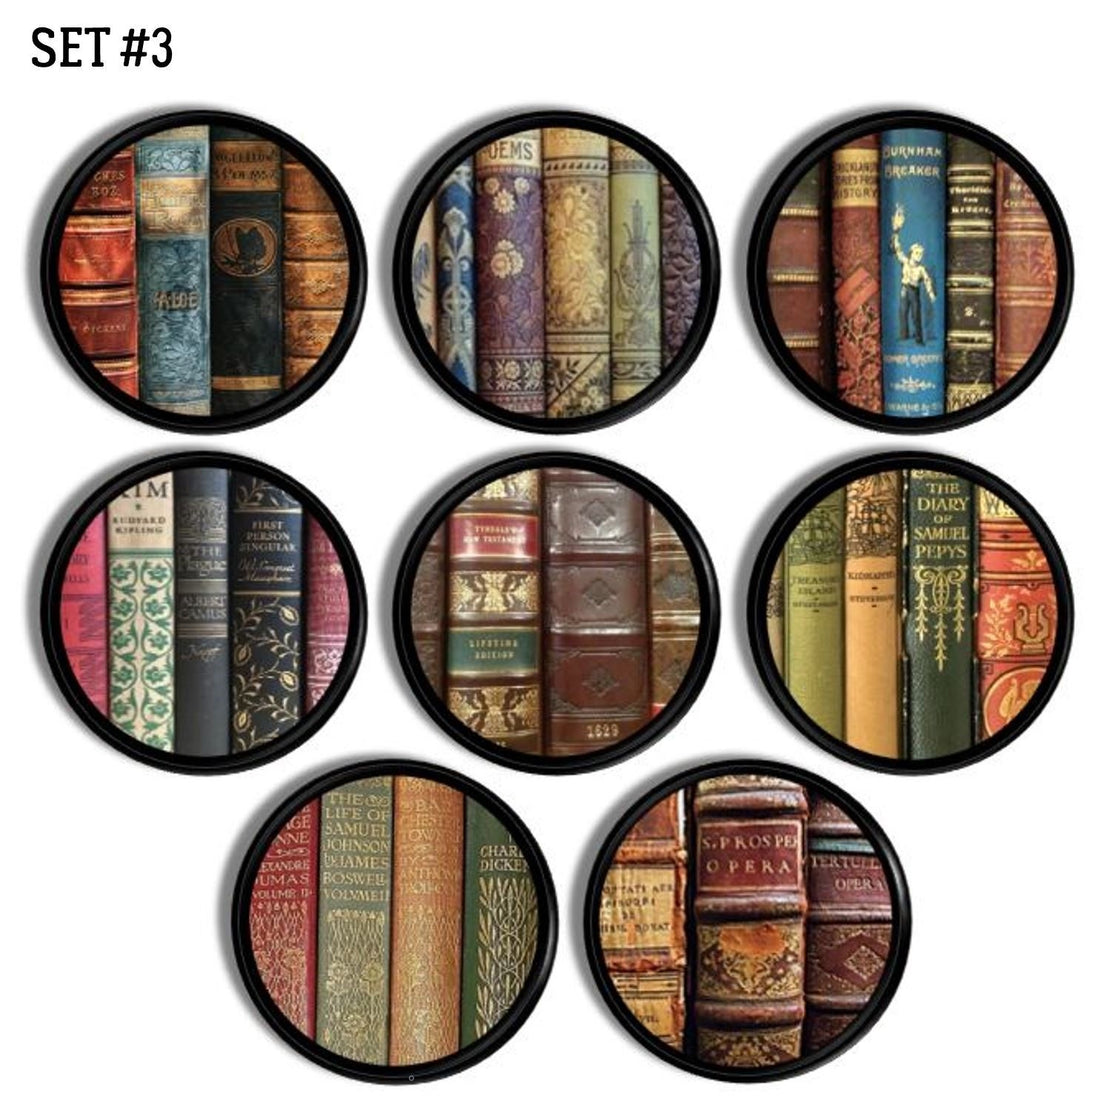 Vintage Book Library Collection Cabinet Knobs, Drawer Pulls - Set No. 417i13